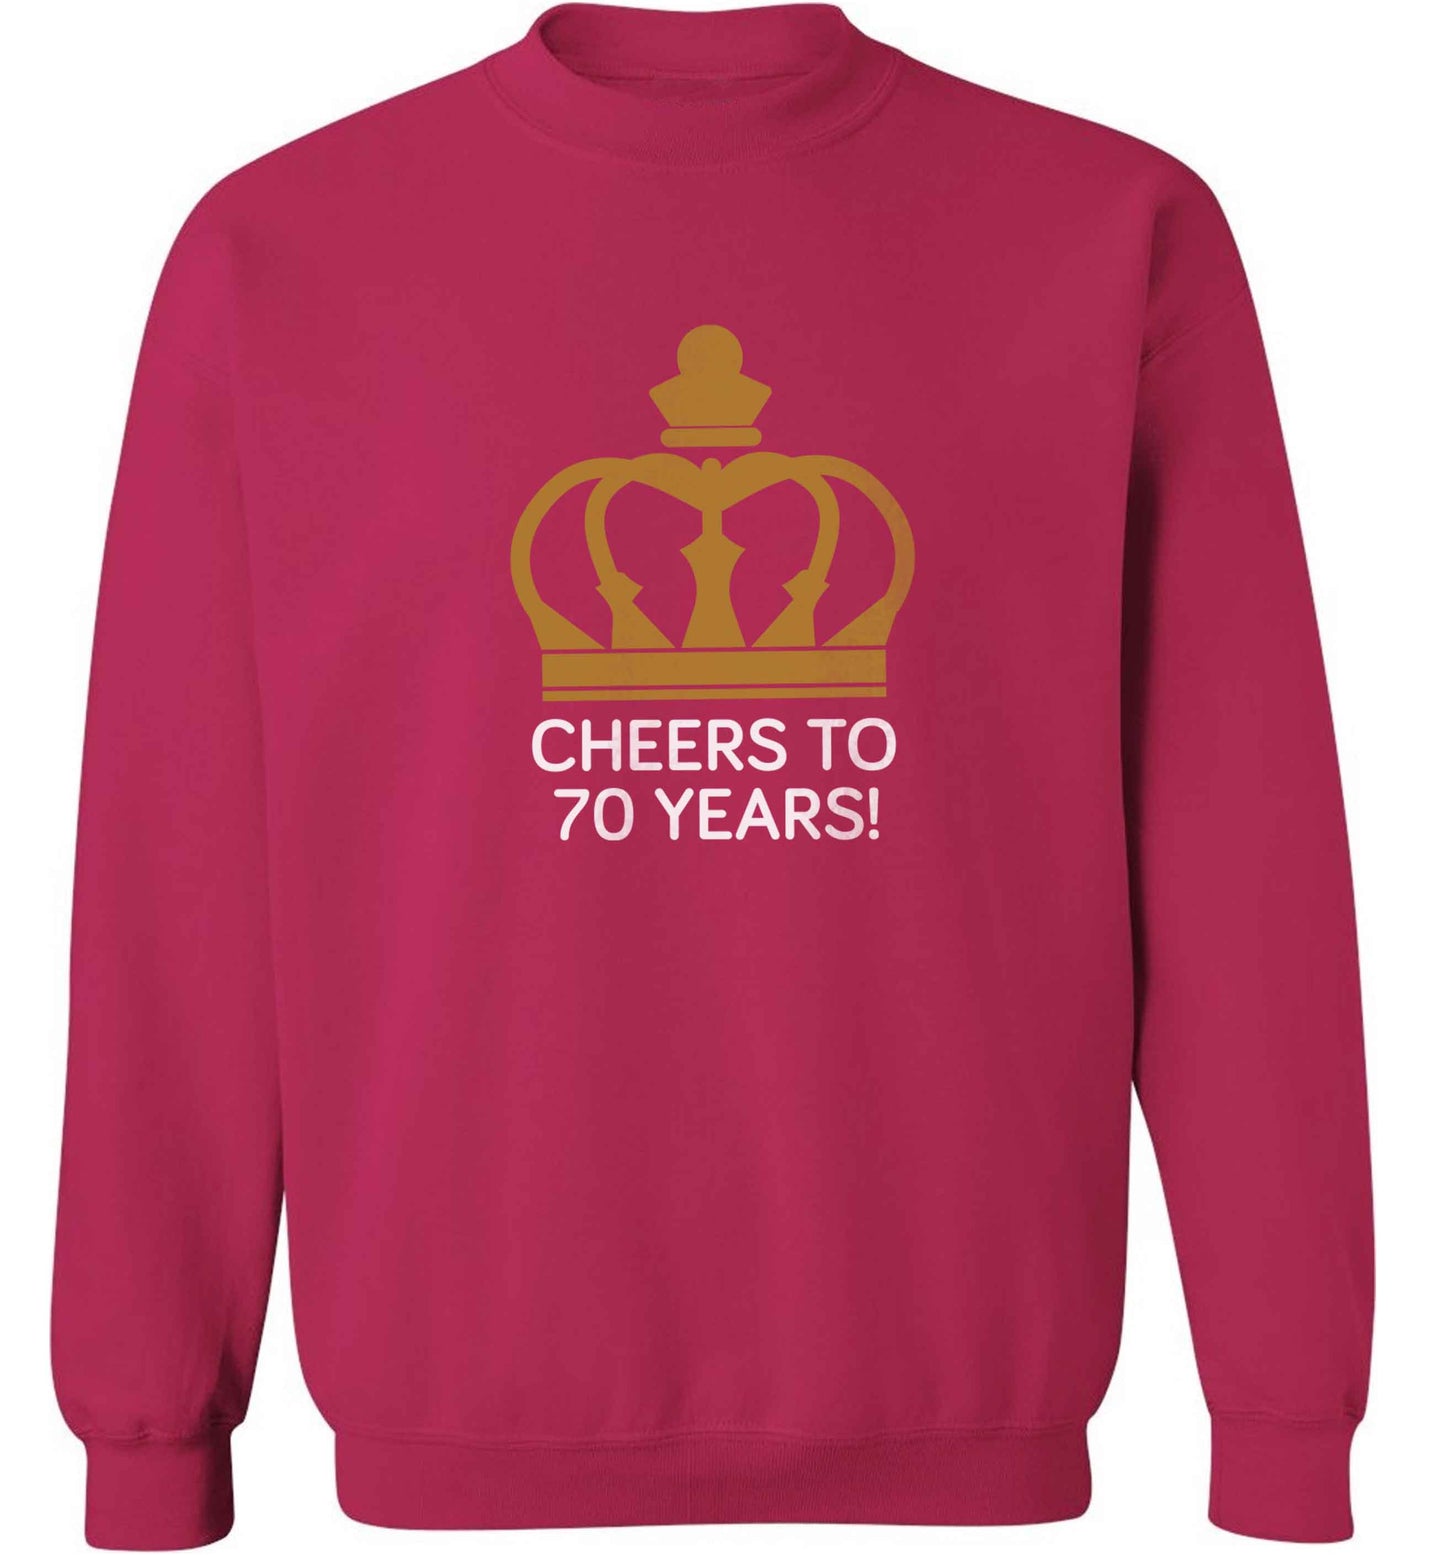 Cheers to 70 years! adult's unisex pink sweater 2XL